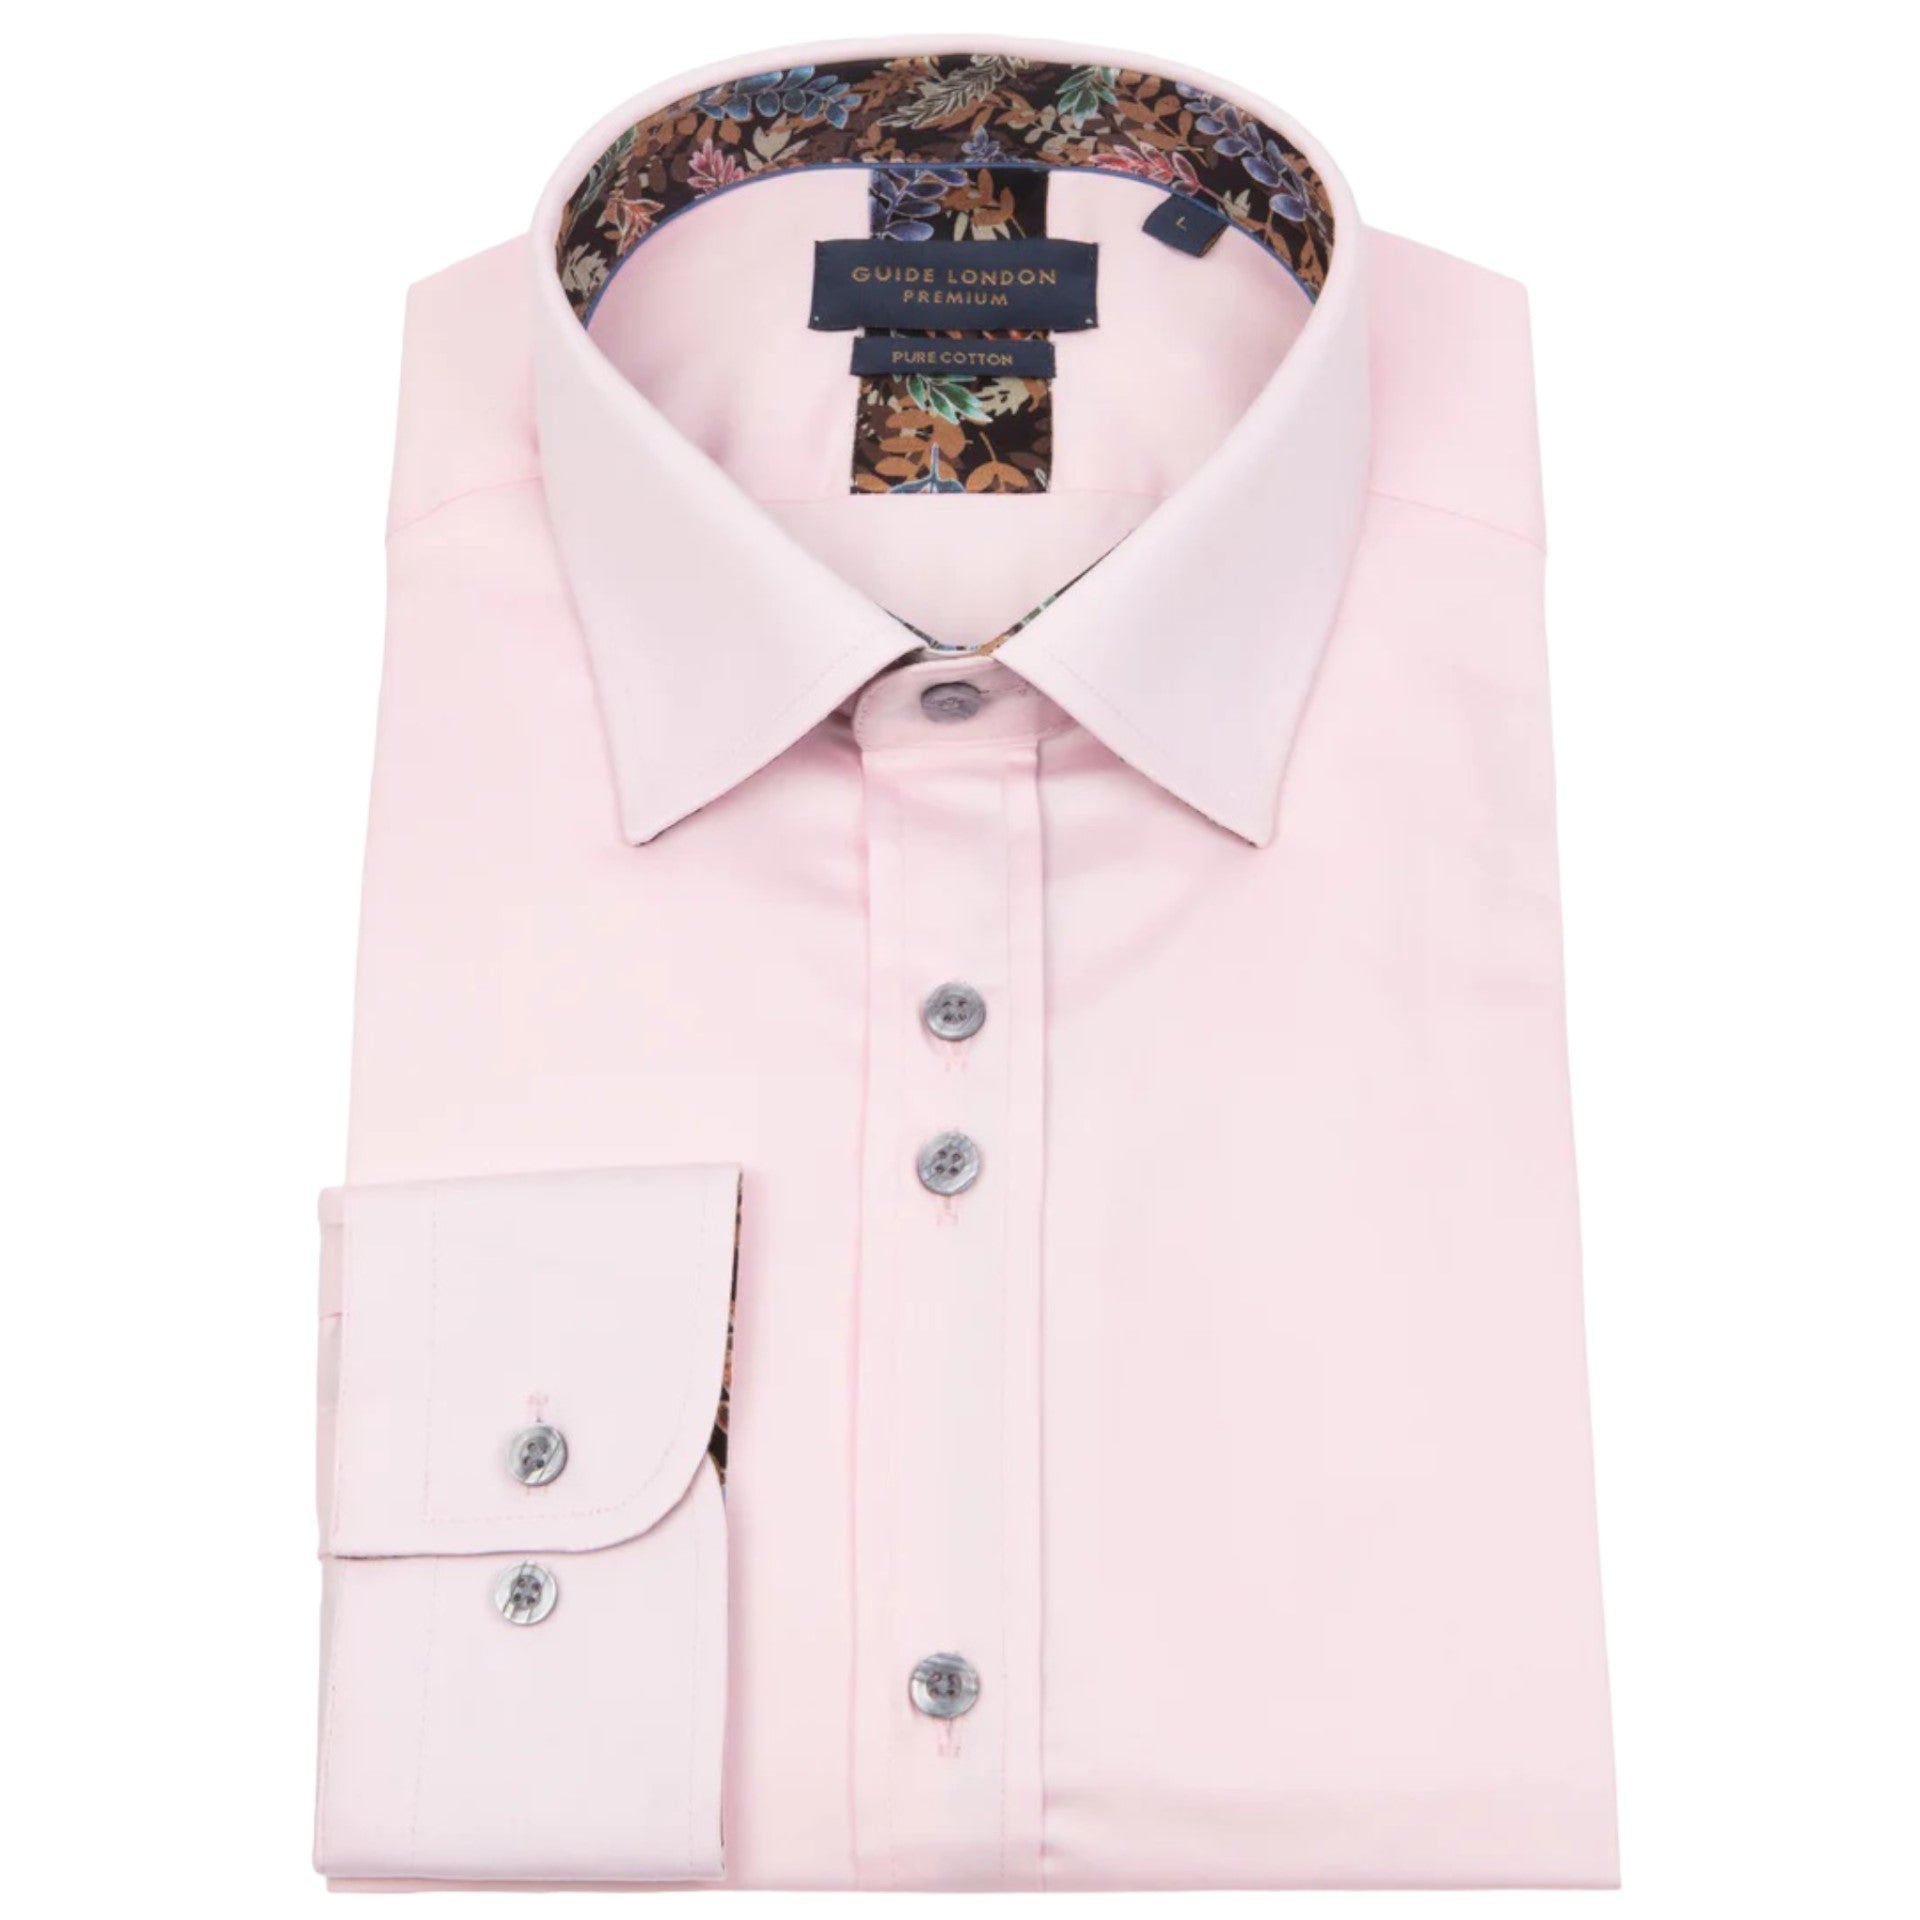 Guide London LS76784 Pink Long Sleeve Cotton Shirt With Contrast Trim